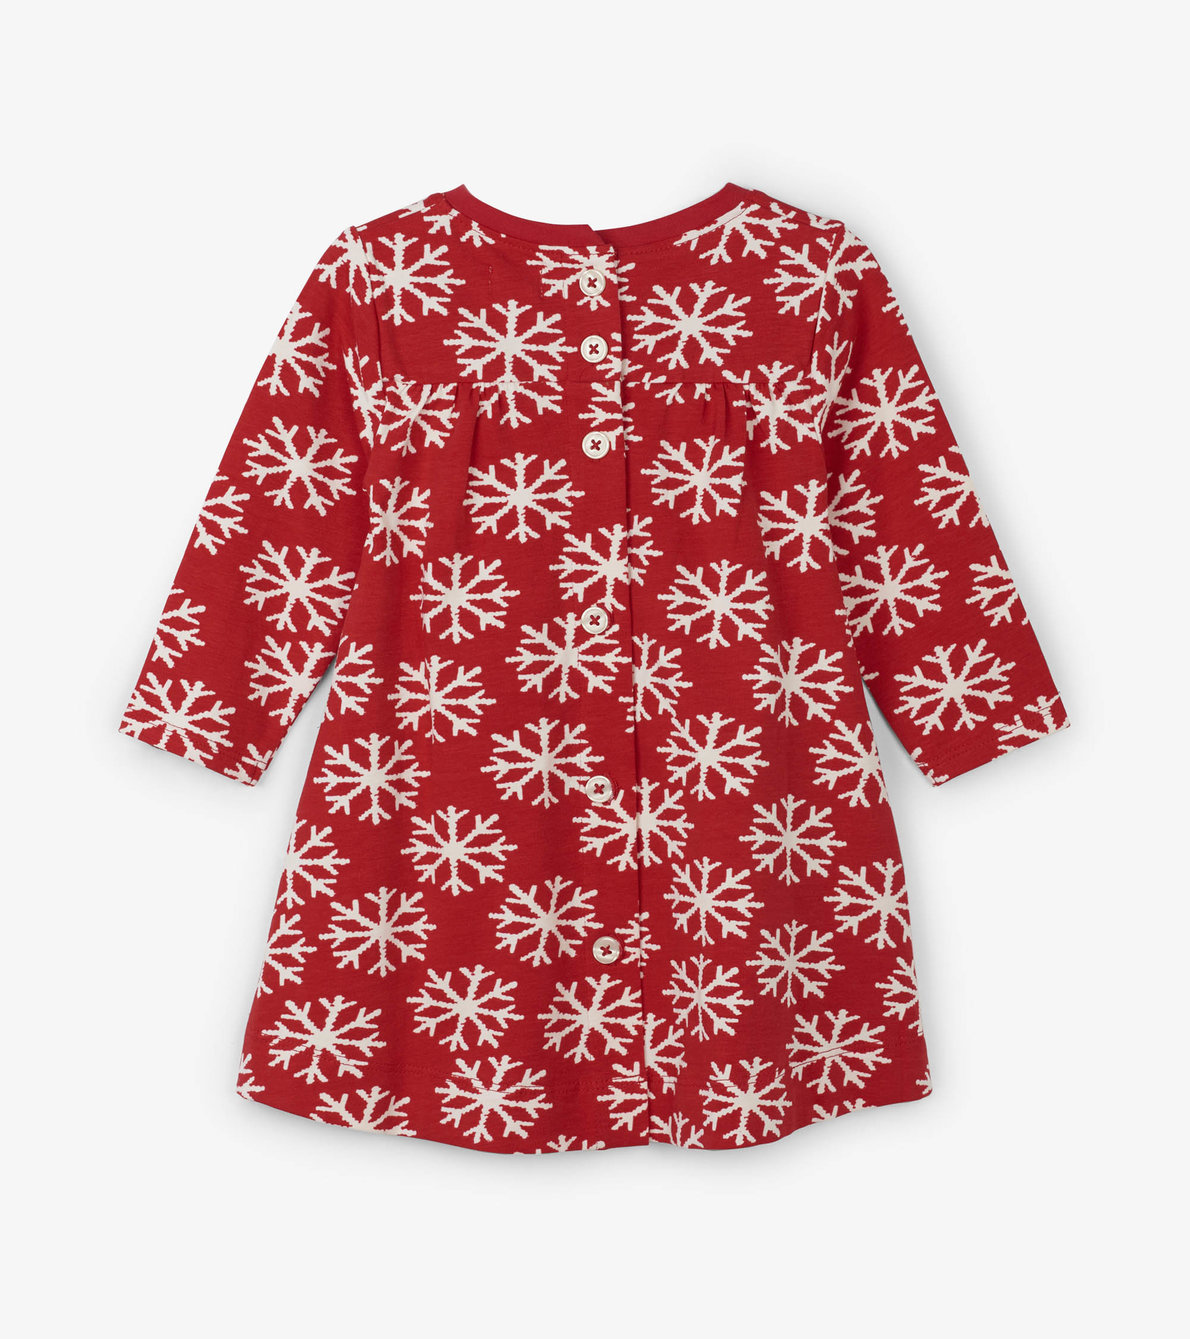 View larger image of Falling Snowflakes Baby Swing Dress